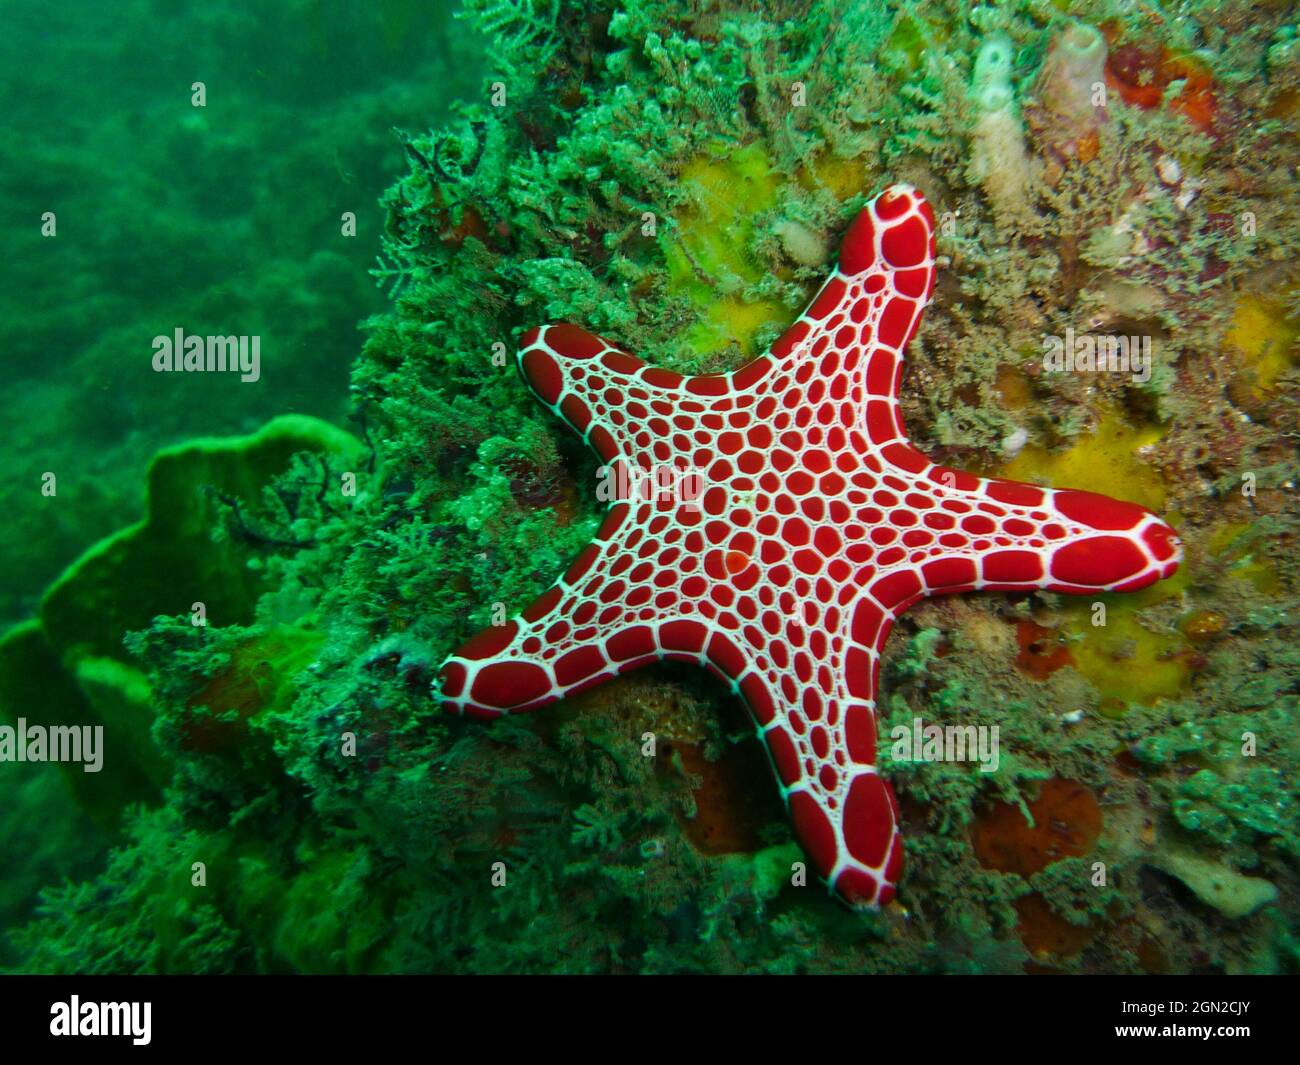 Red biscuit star (Pentagonaster duebeni), stands out brightly against the reef lit by ambient light. Pig Island near Coffs Harbour, New South Wales, A Stock Photo